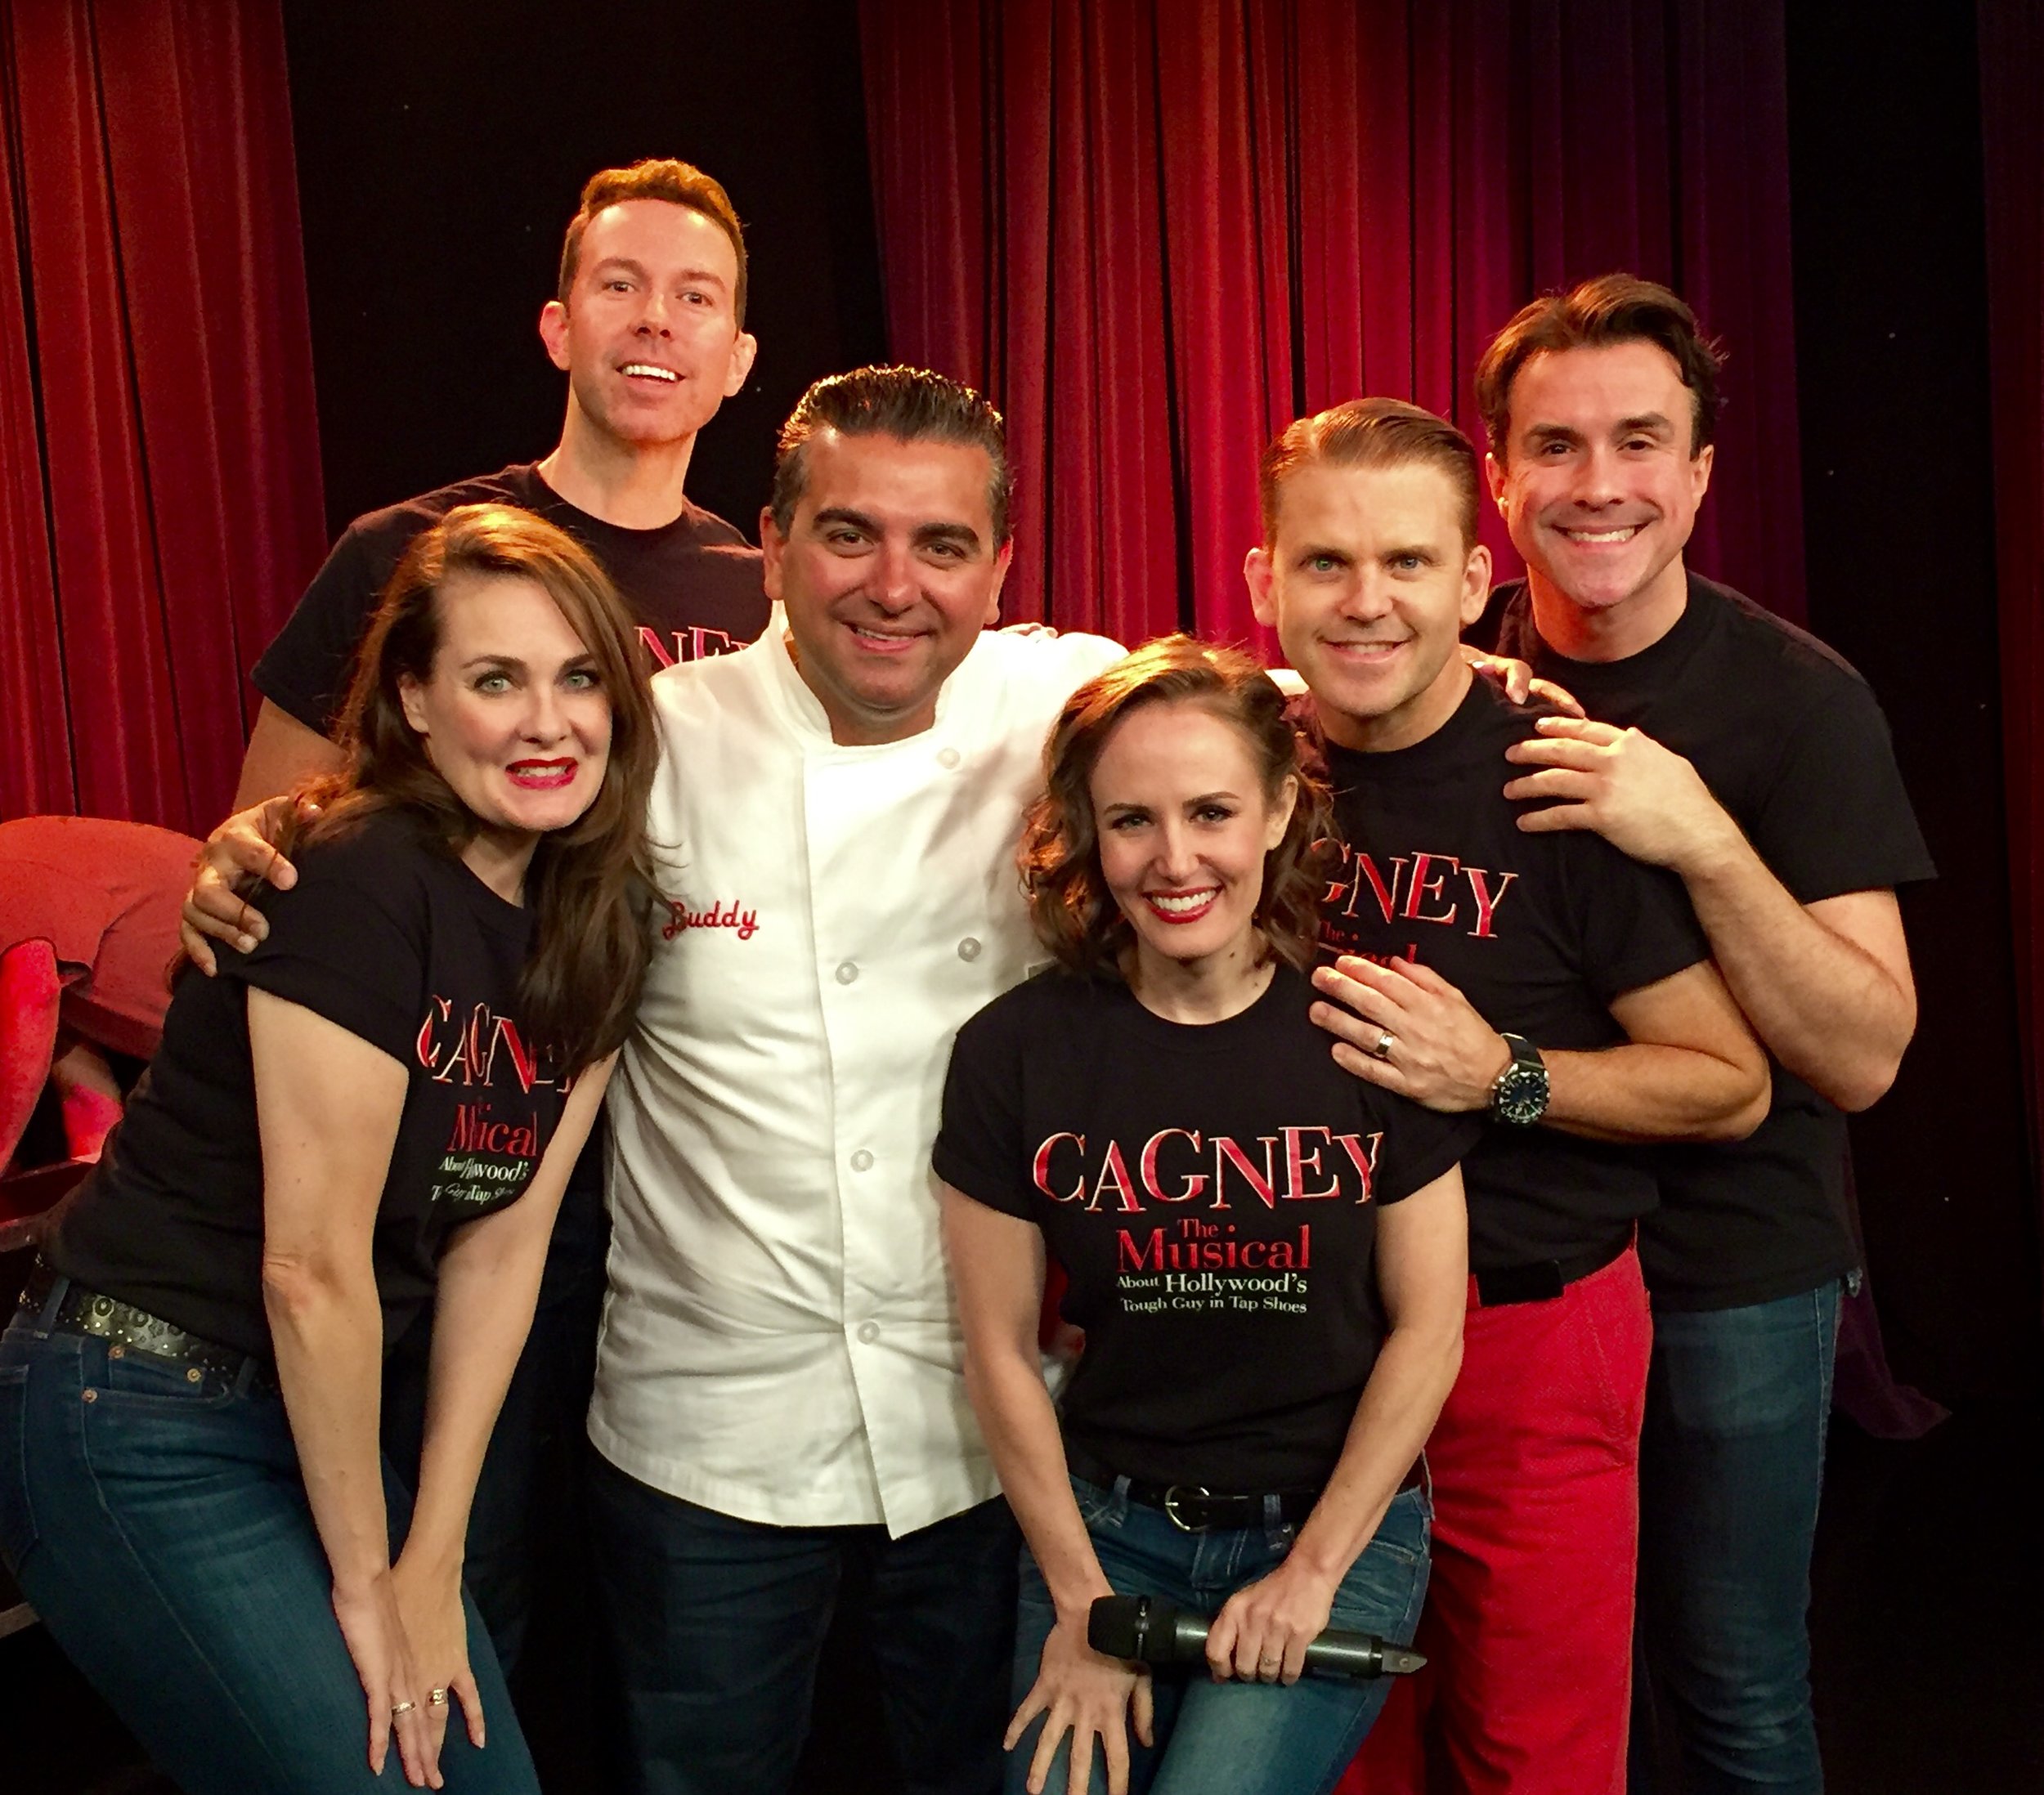 Cake Boss Buddy Valastro with the cast of CAGNEY 